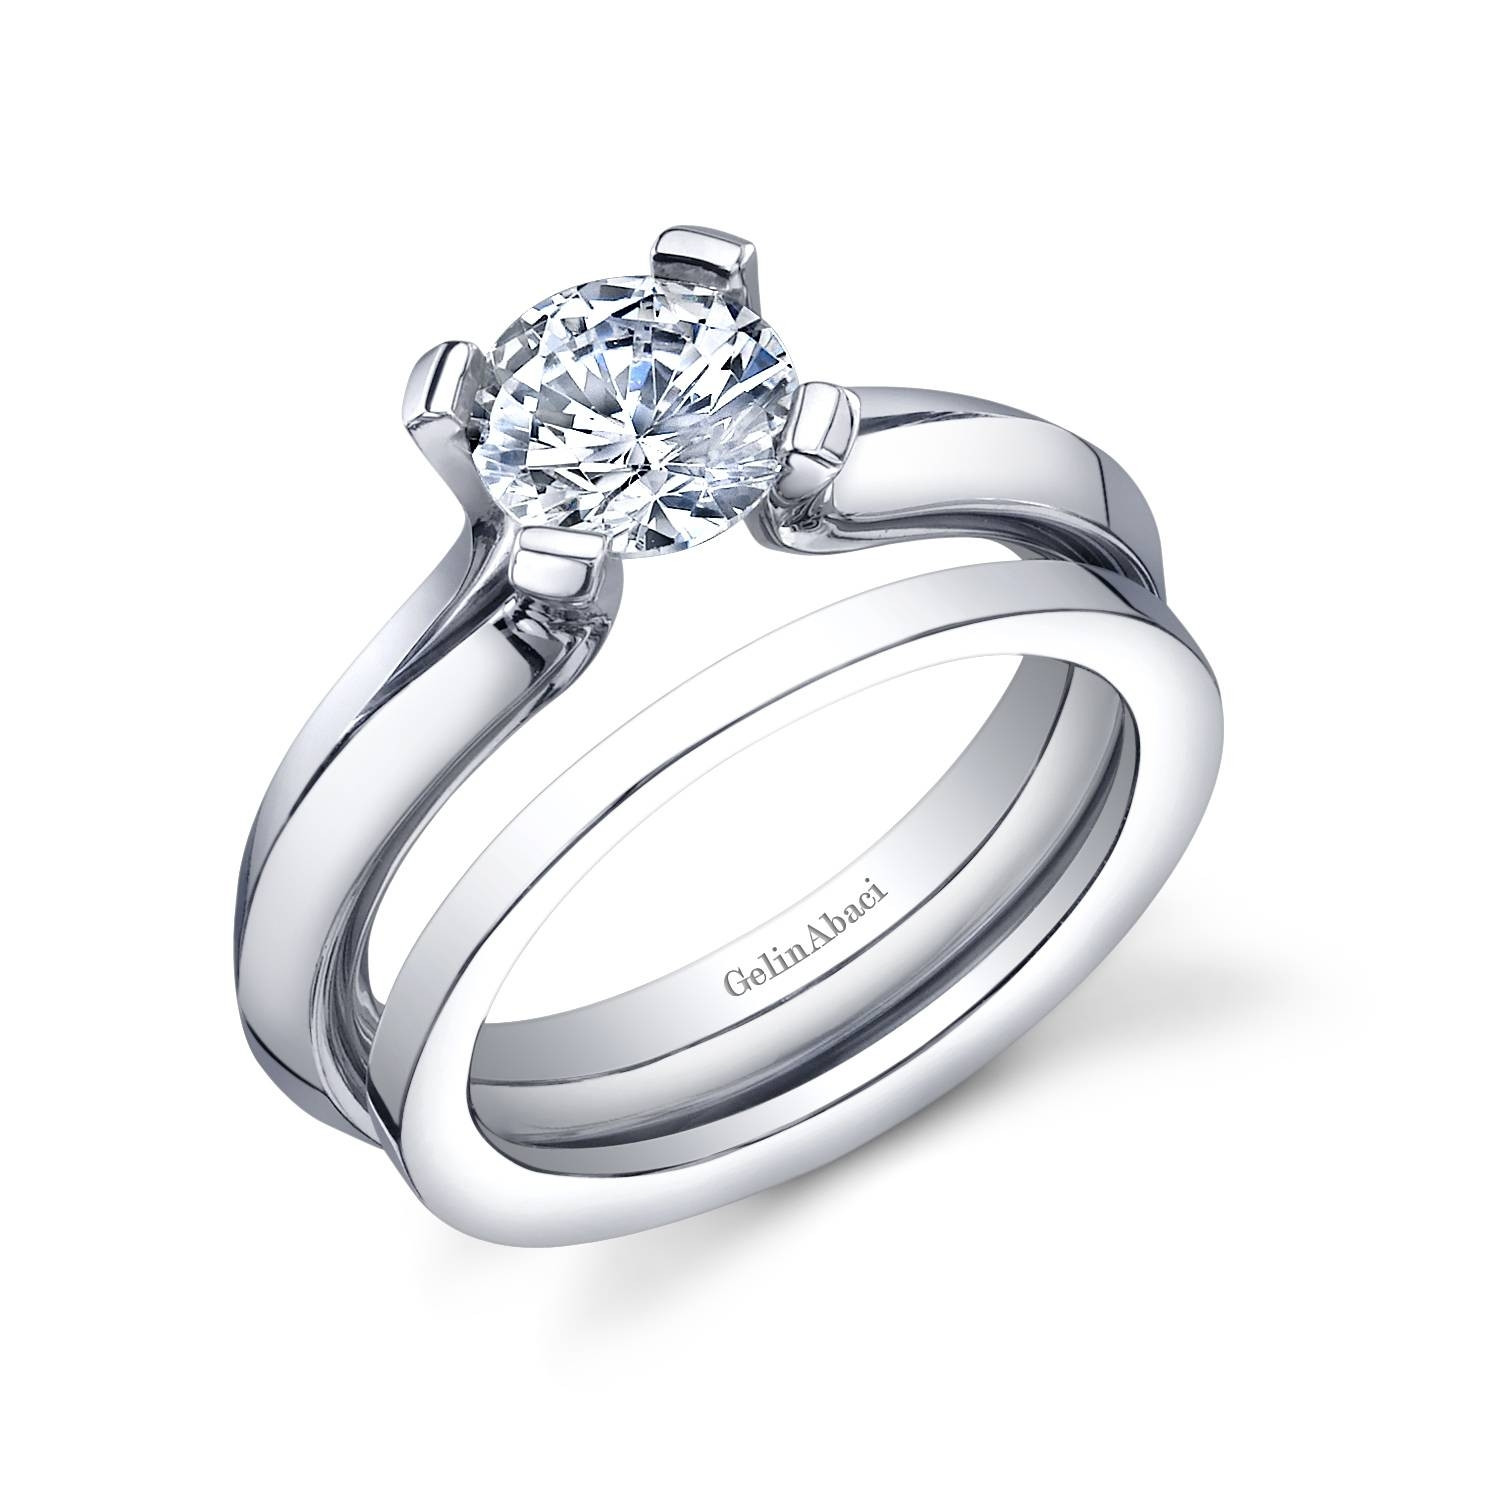 Platinum Wedding Bands For Her
 15 Best Collection of Platinum Wedding Bands For Her